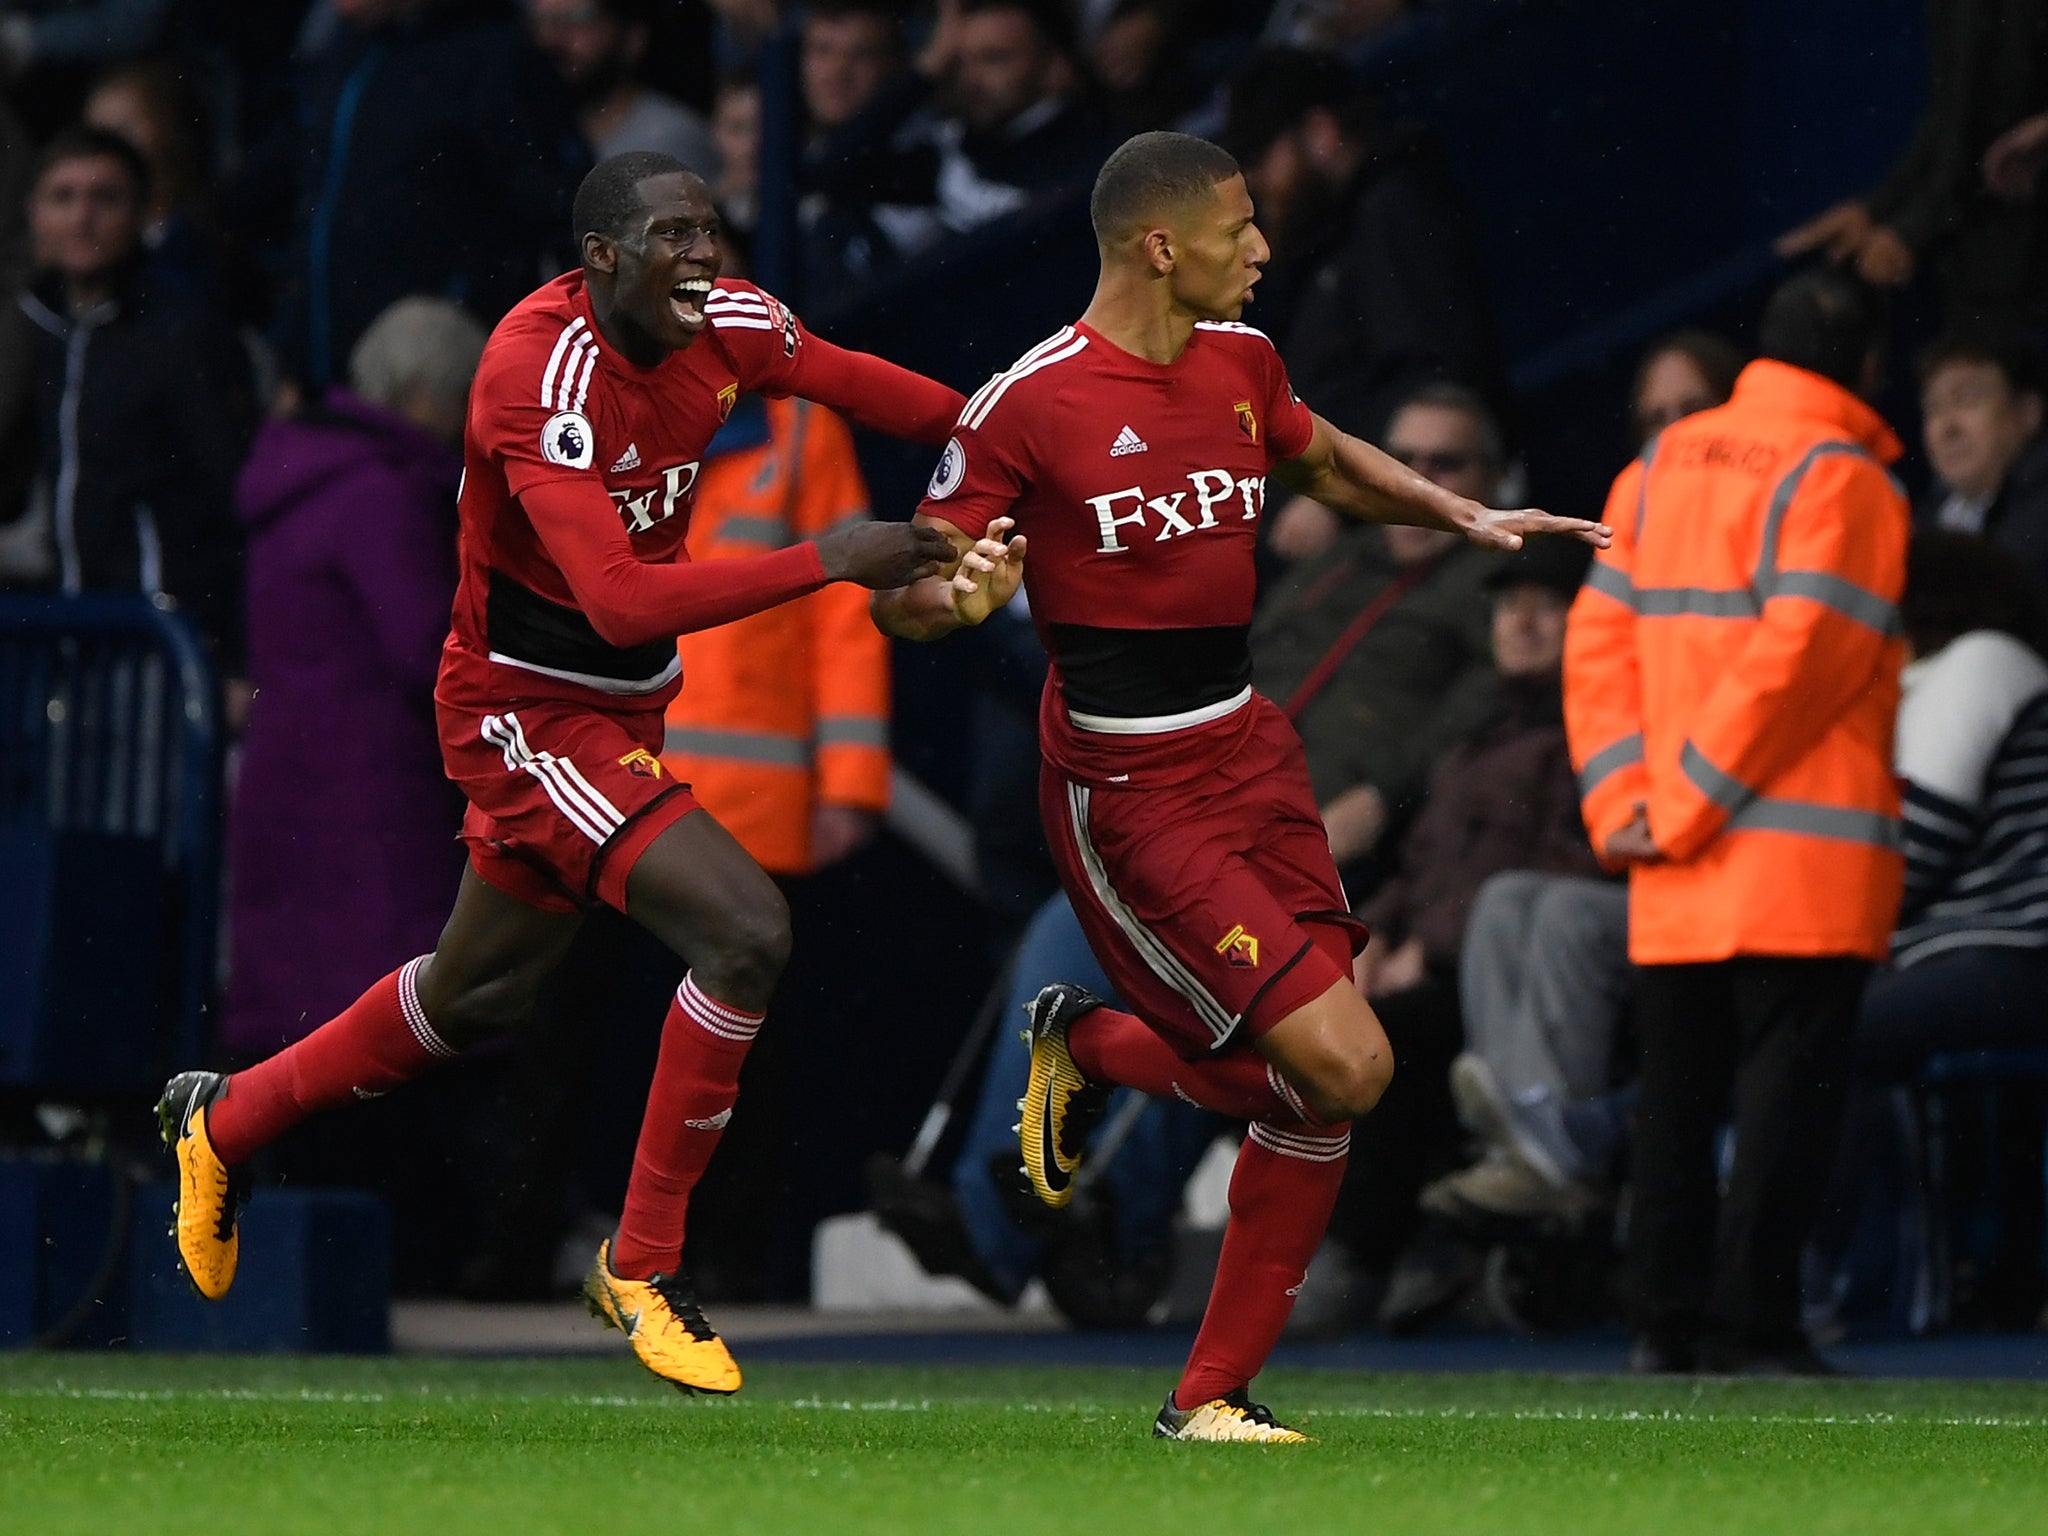 Richarlison celebrates scoring Watford's equaliser against West Bromwich Albion in their 2-2 draw